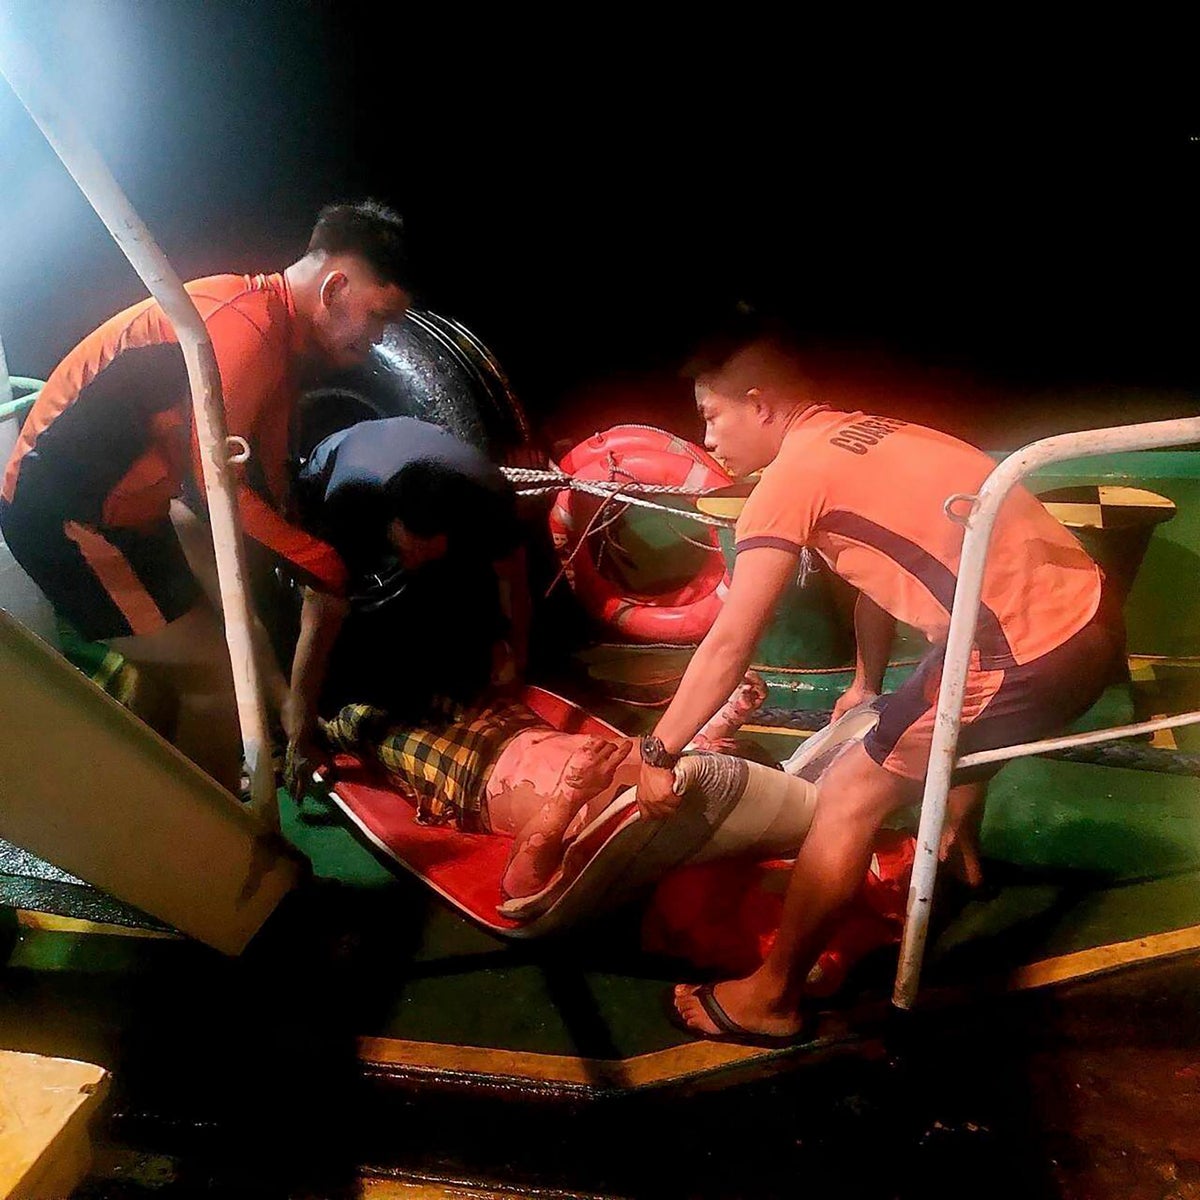 Philippine fishing boat explosion and fire kill 6 crewmembers while 6 others are rescued